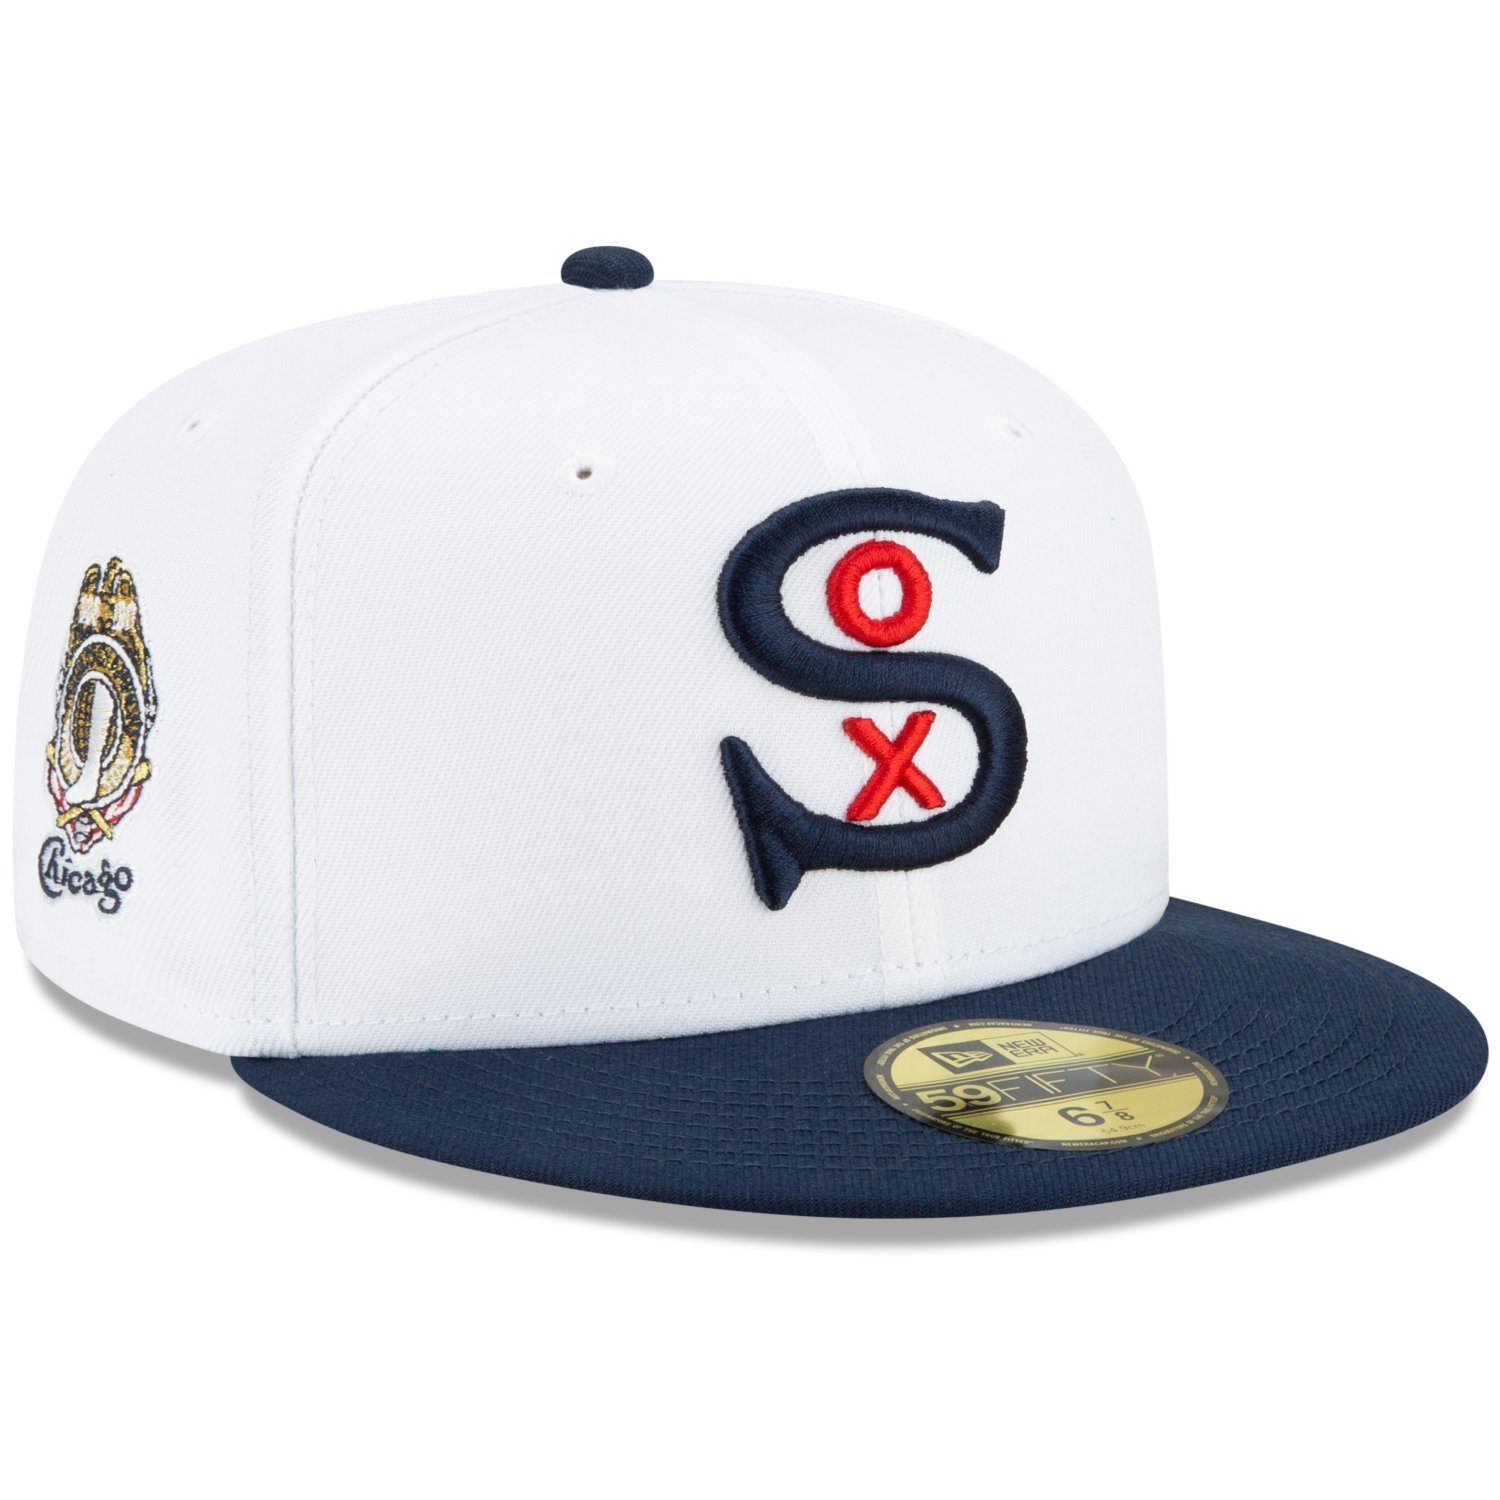 New Era Fitted Cap 59Fifty WORLD SERIES Chicago White Sox